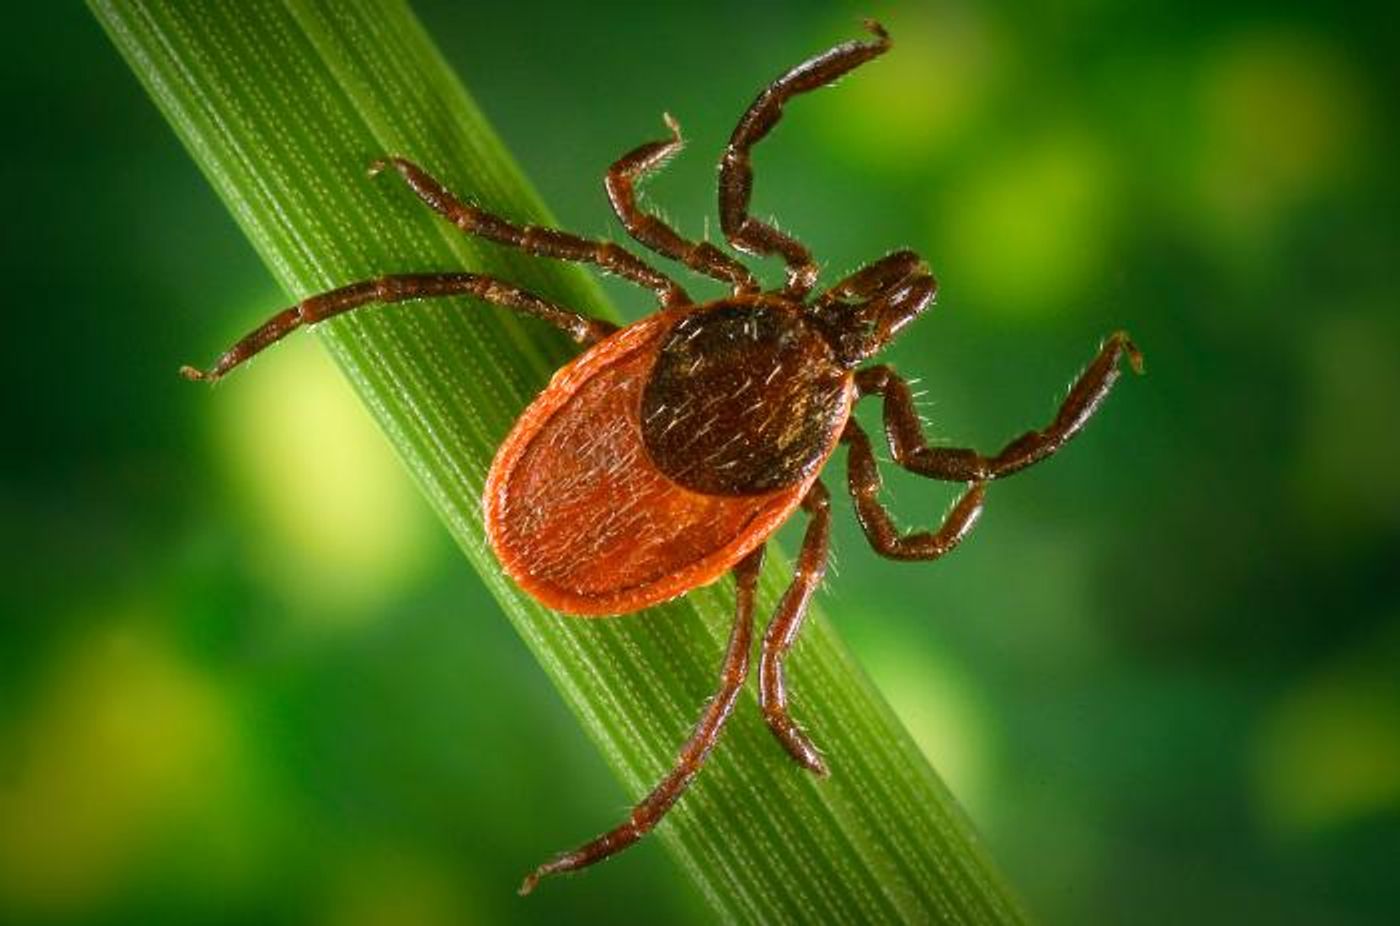 Blacklegged tick, Ixodes pacificus, a known vector for the zoonotic bacteria, Borrelia burgdorferi, which causes Lyme disease.  / Credit: CDC/ James Gathany; William L. Nicholson, Ph.D.